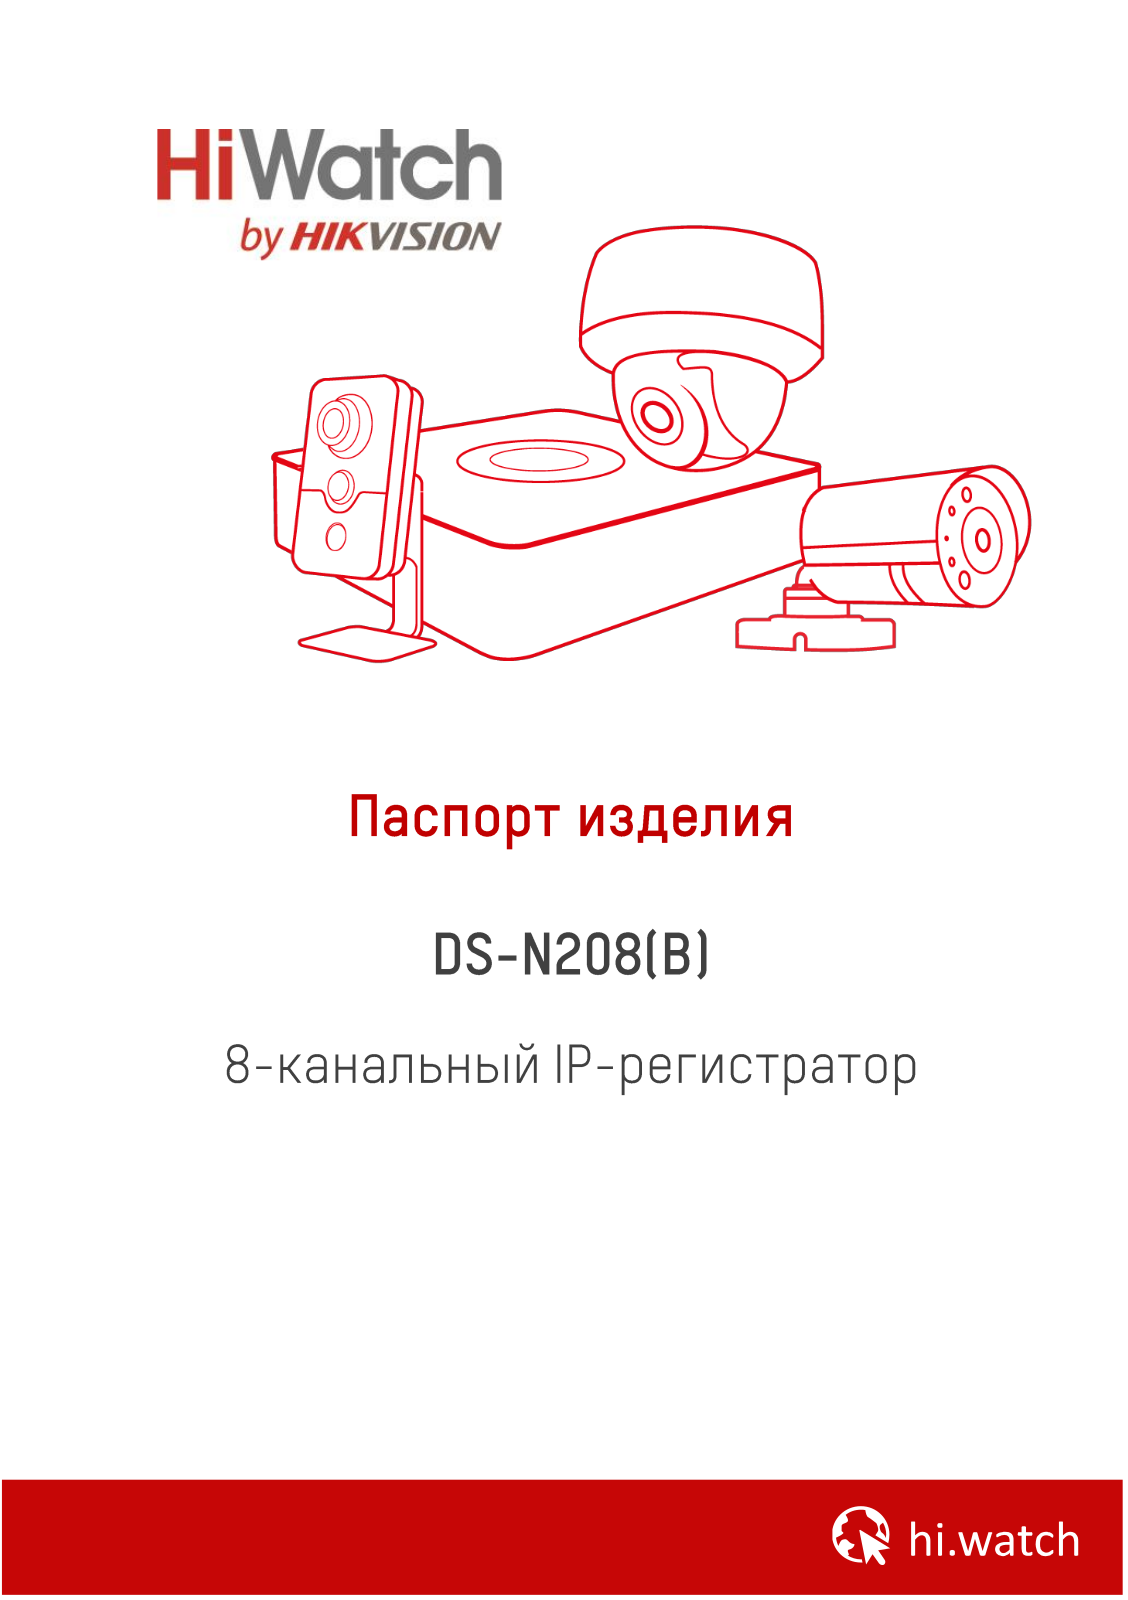 Hikvision HiWatch DS-N208 Manual